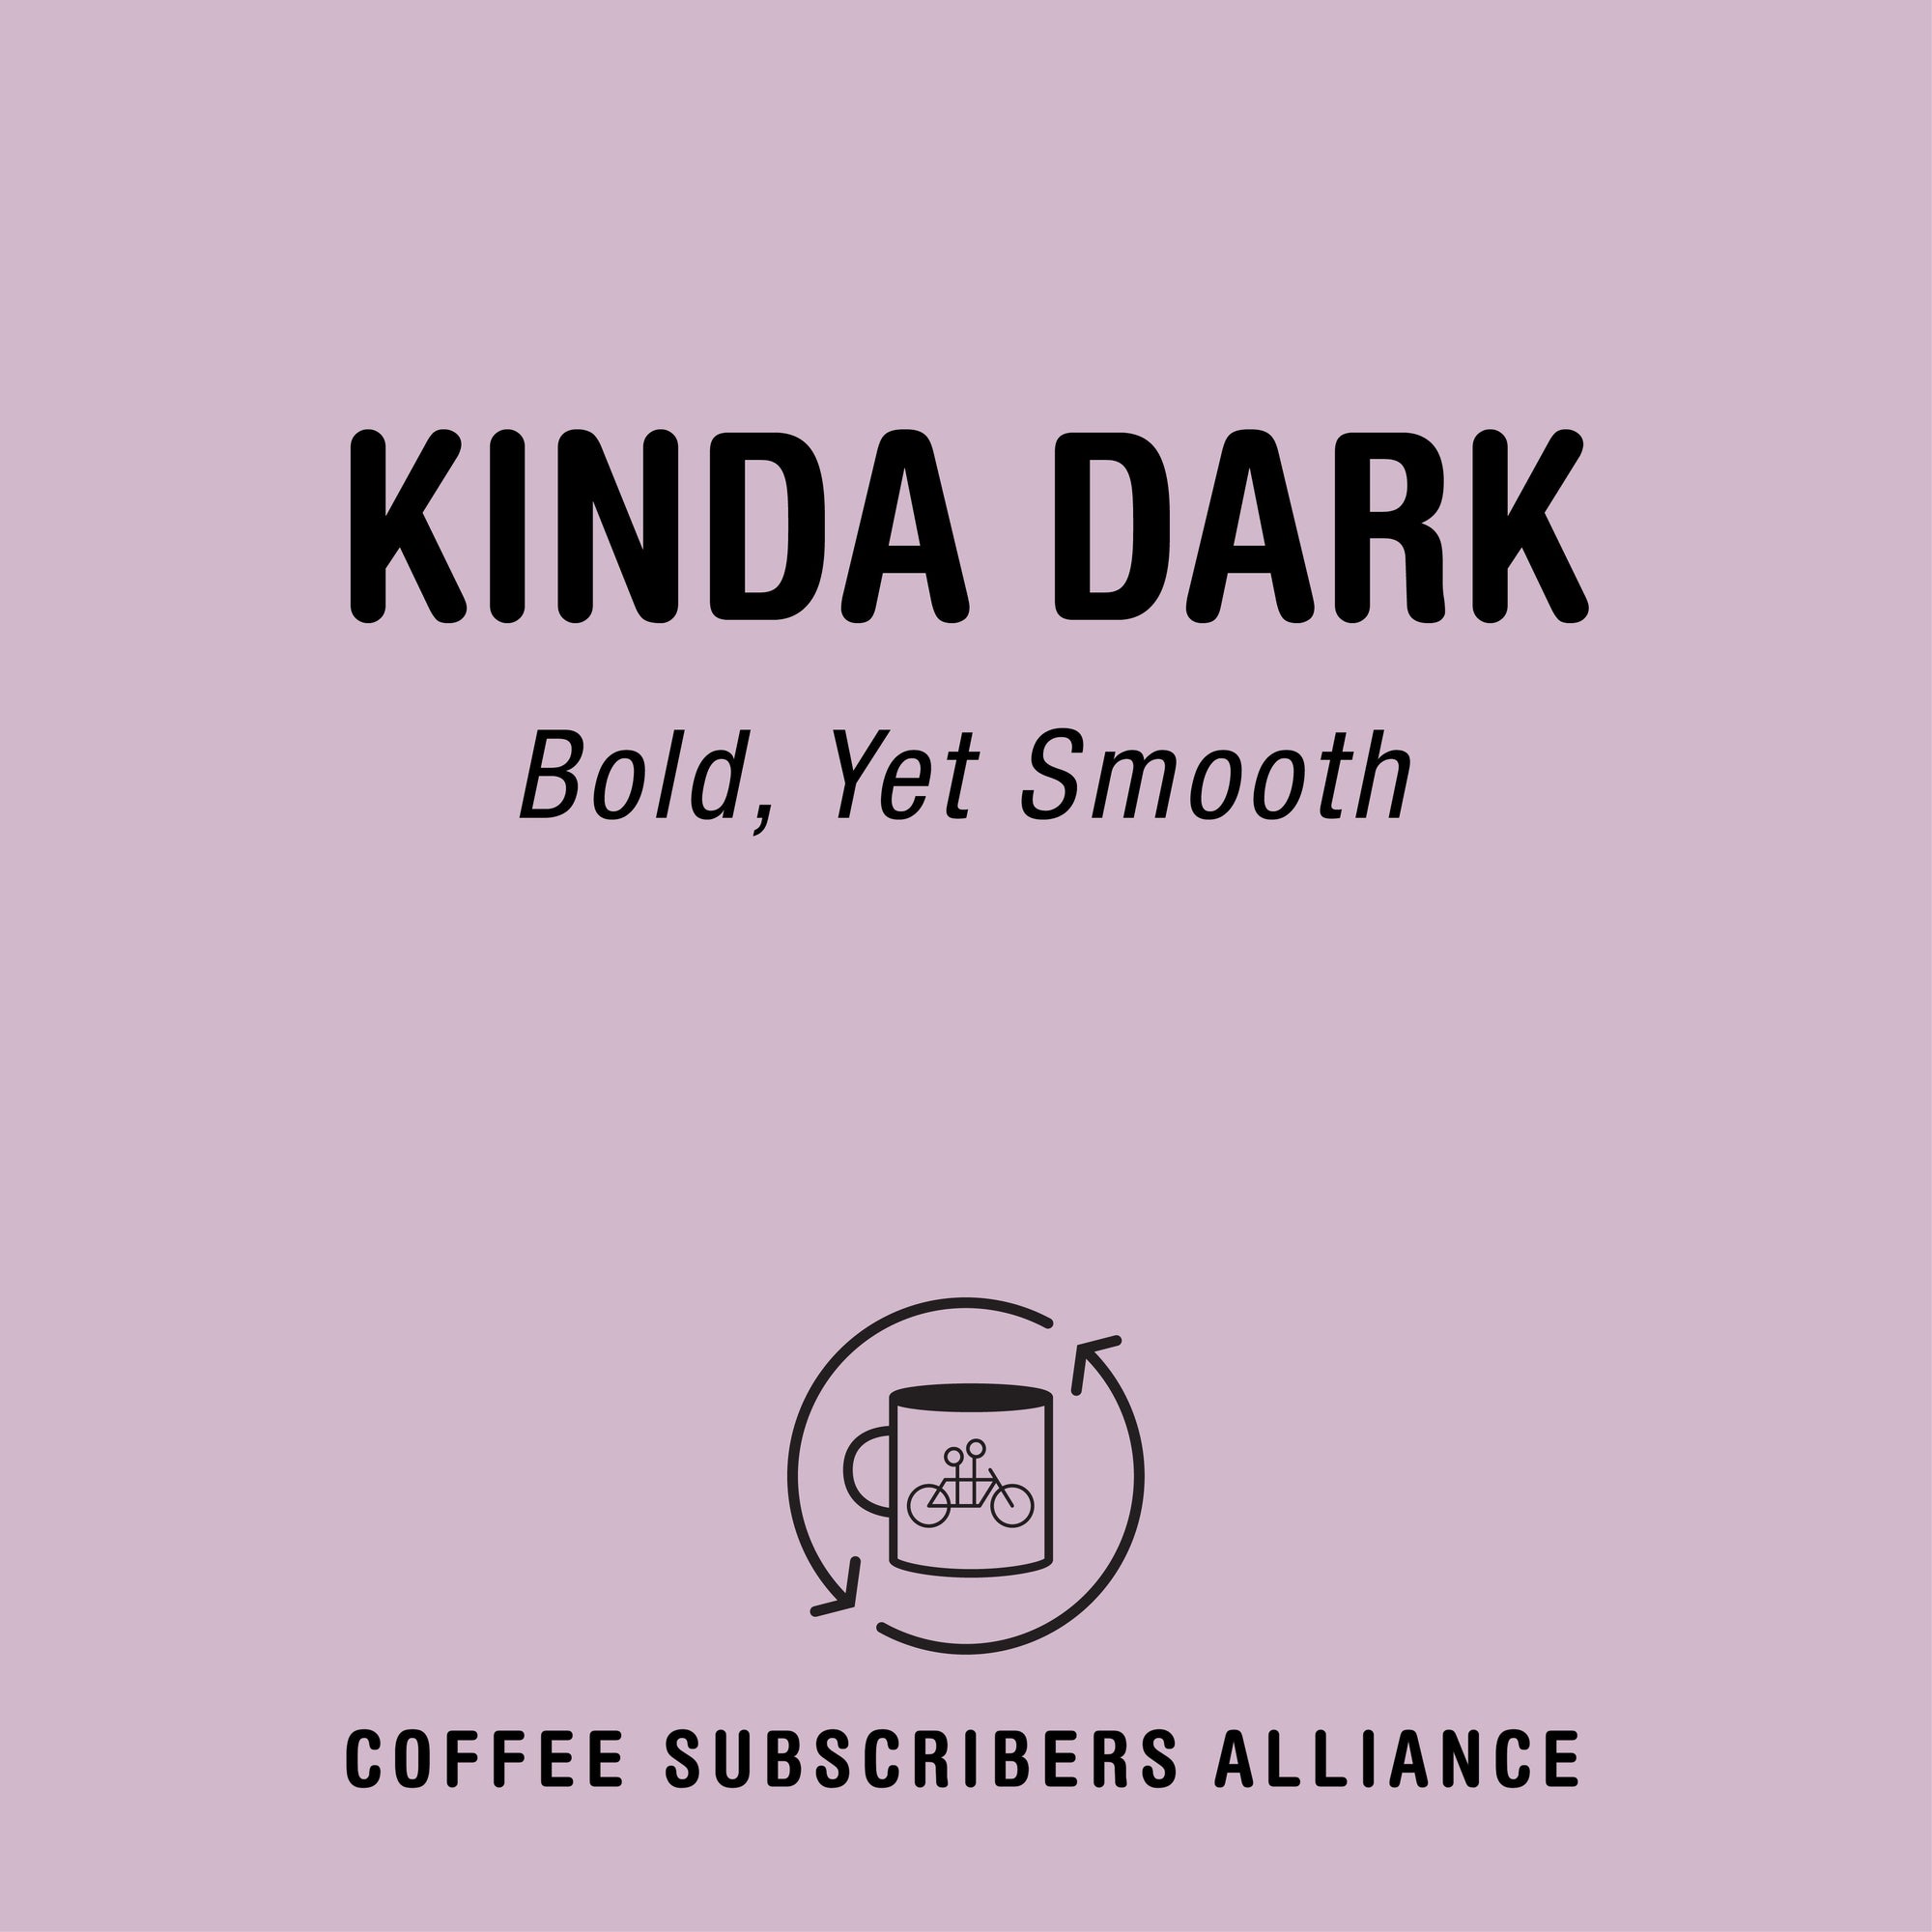 A promotional graphic for "Kinda Dark Subscription" coffee from Tandem Coffee Roasters in black text on a muted pink background, describing the coffee as "bold, yet smooth" with a small cup icon.